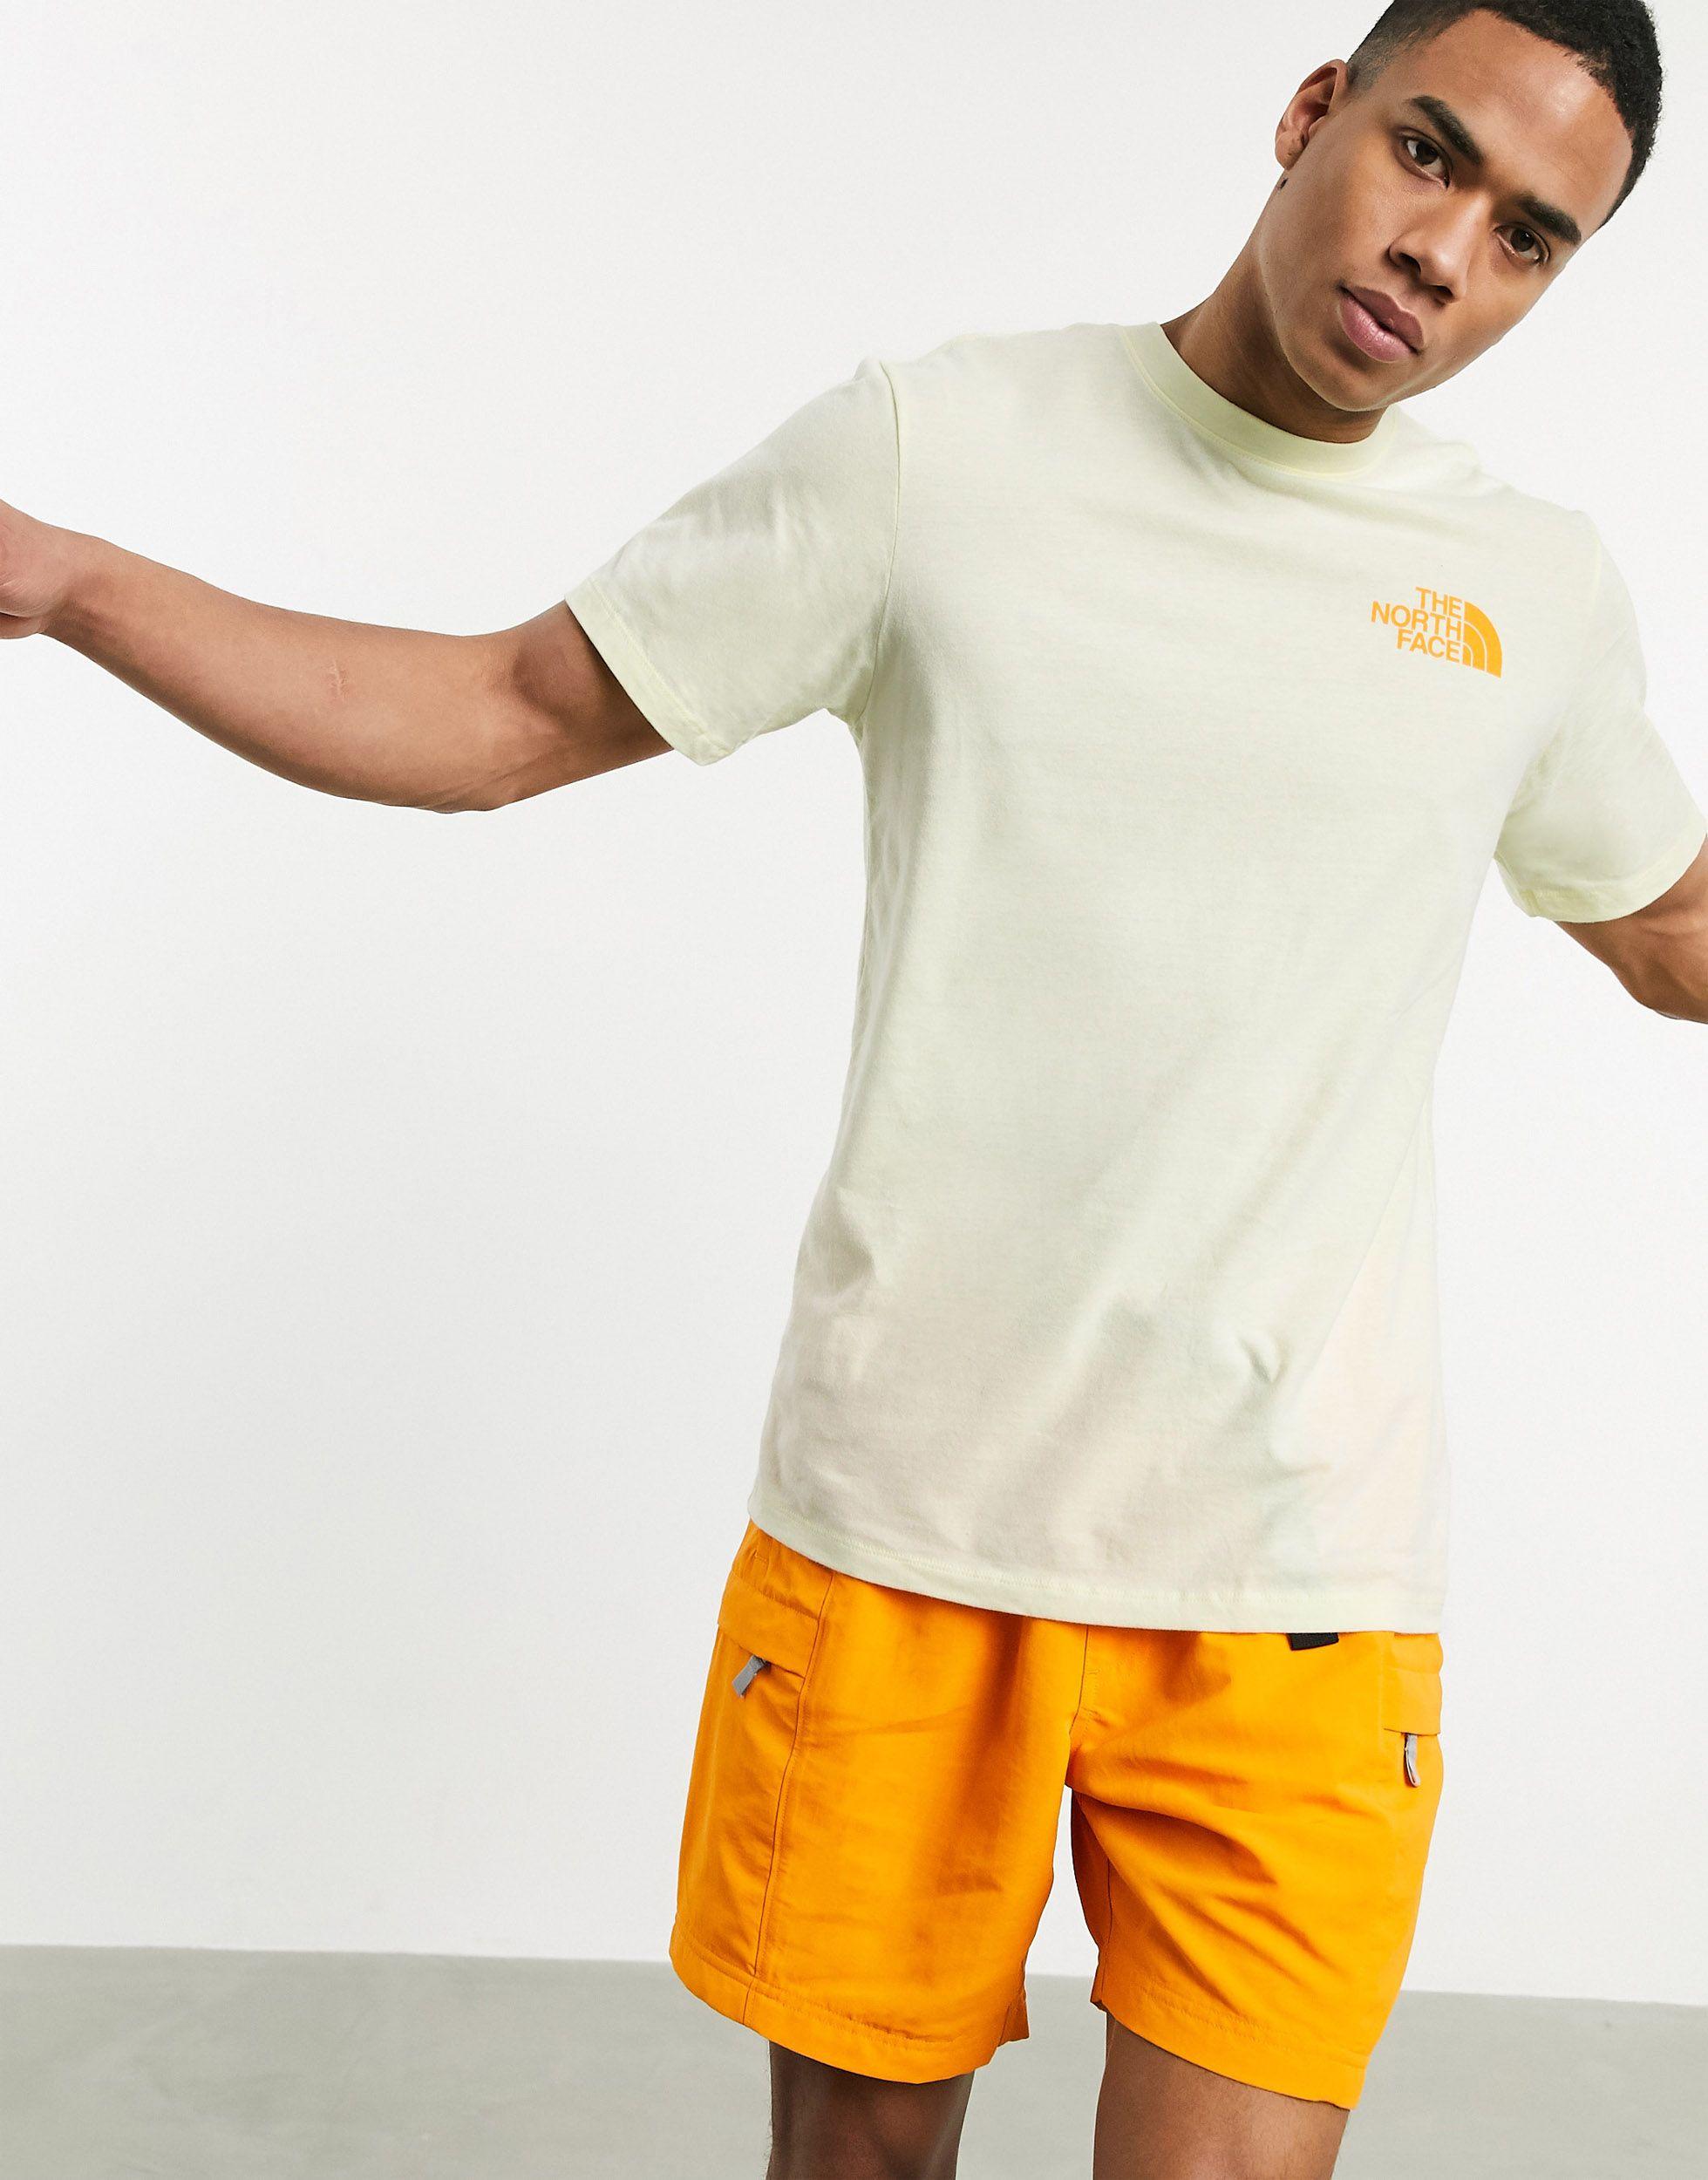 The North Face Cotton 66 California T-shirt in Yellow for Men - Lyst